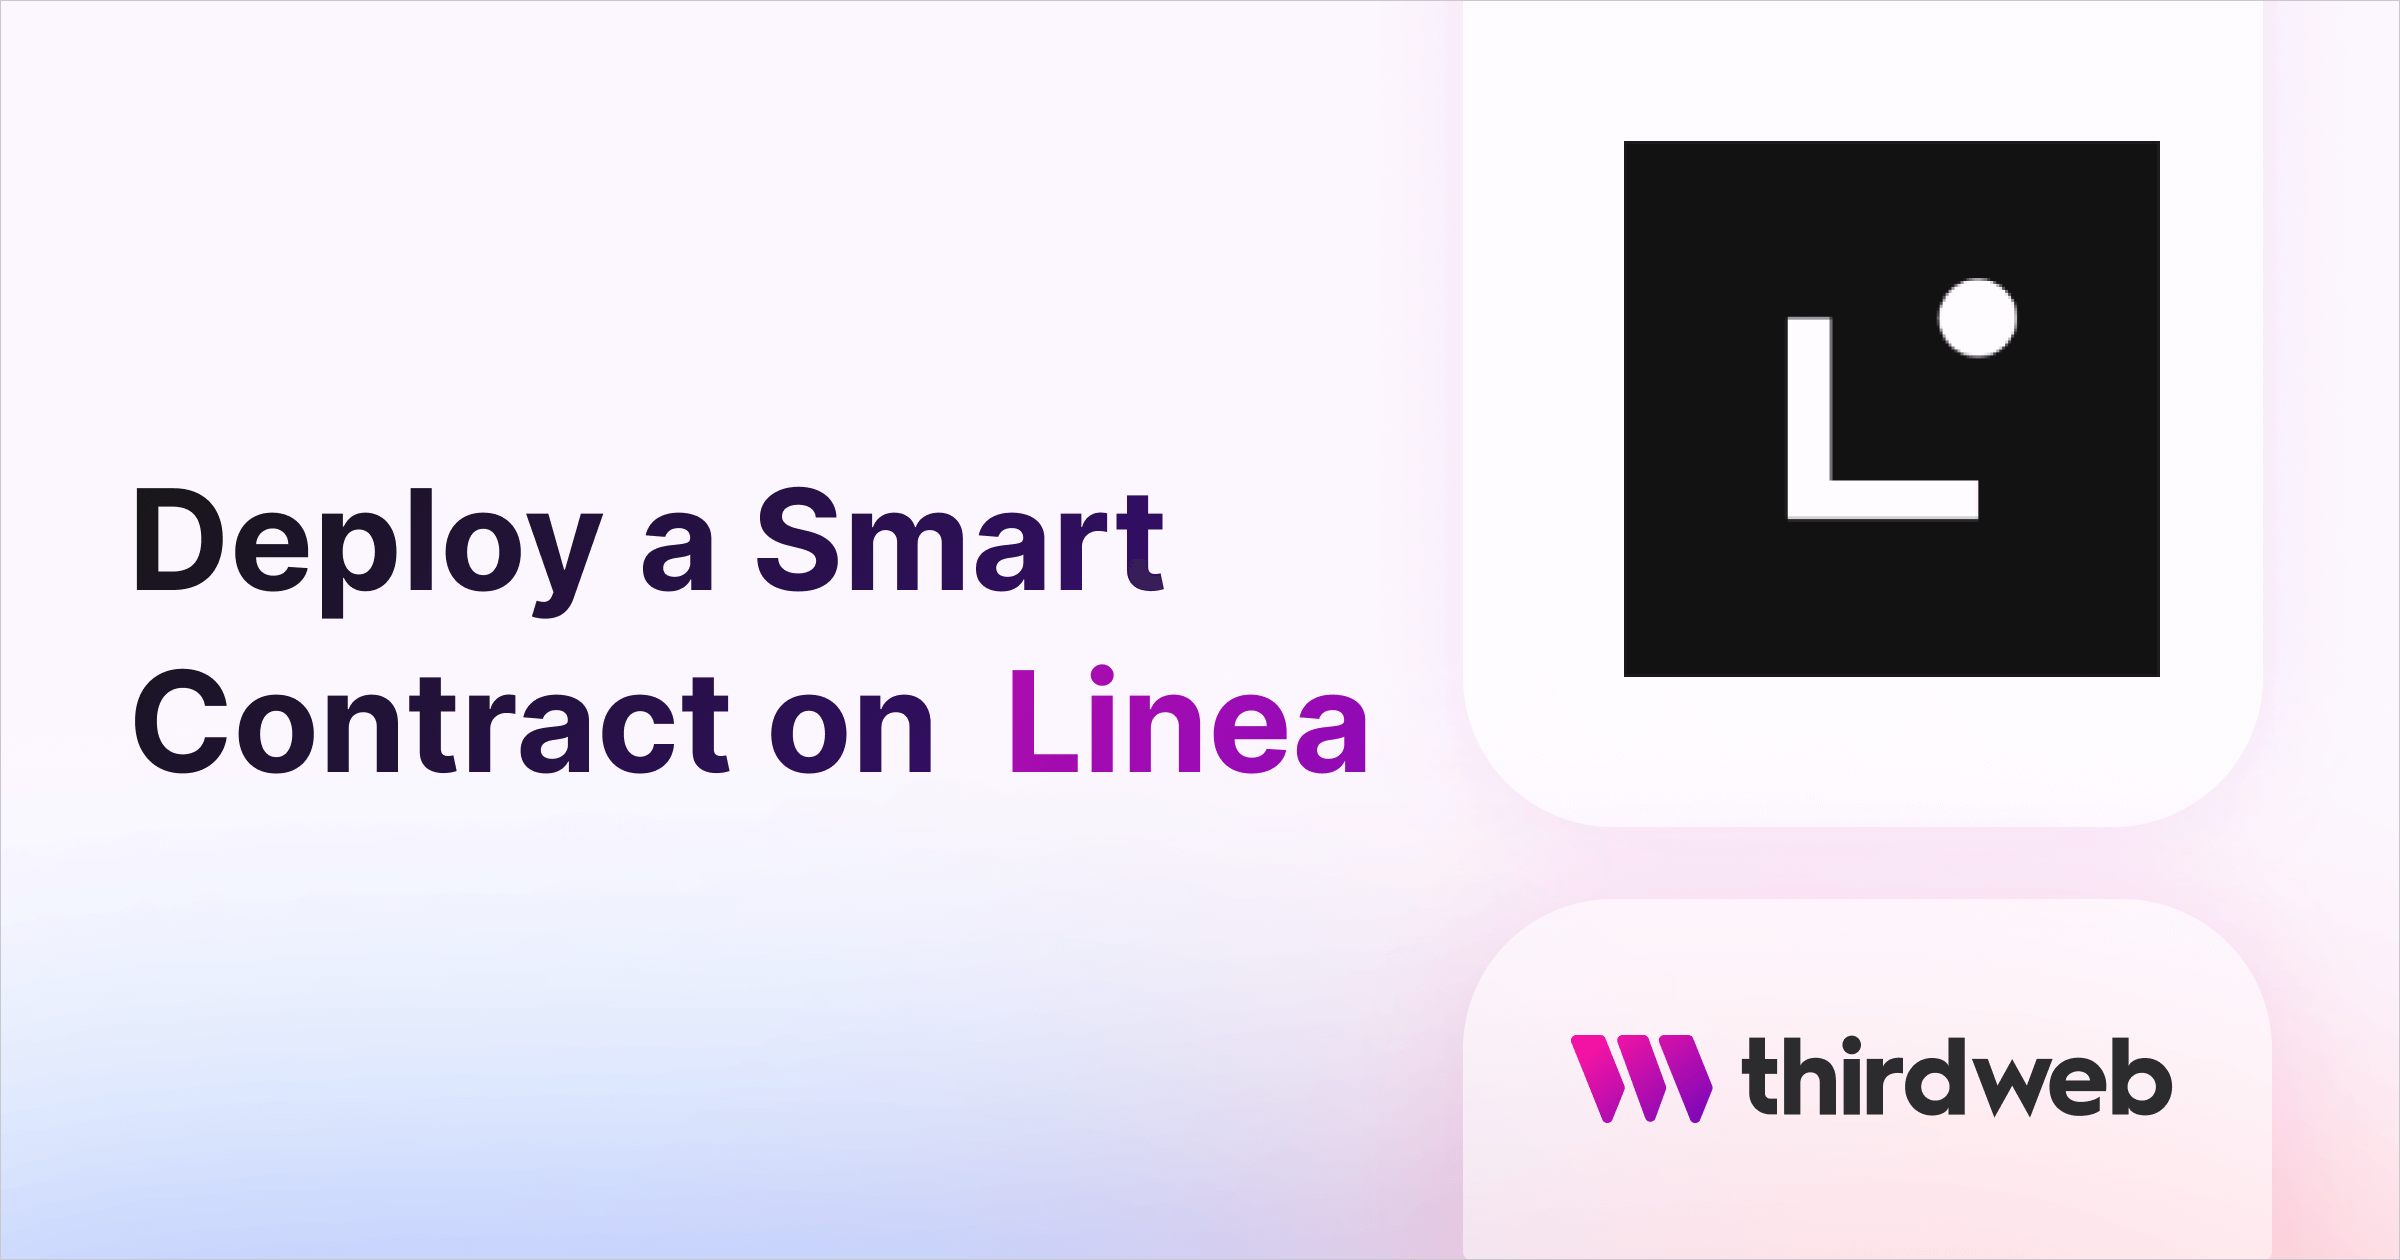 Deploy a Smart Contract on the Linea testnet